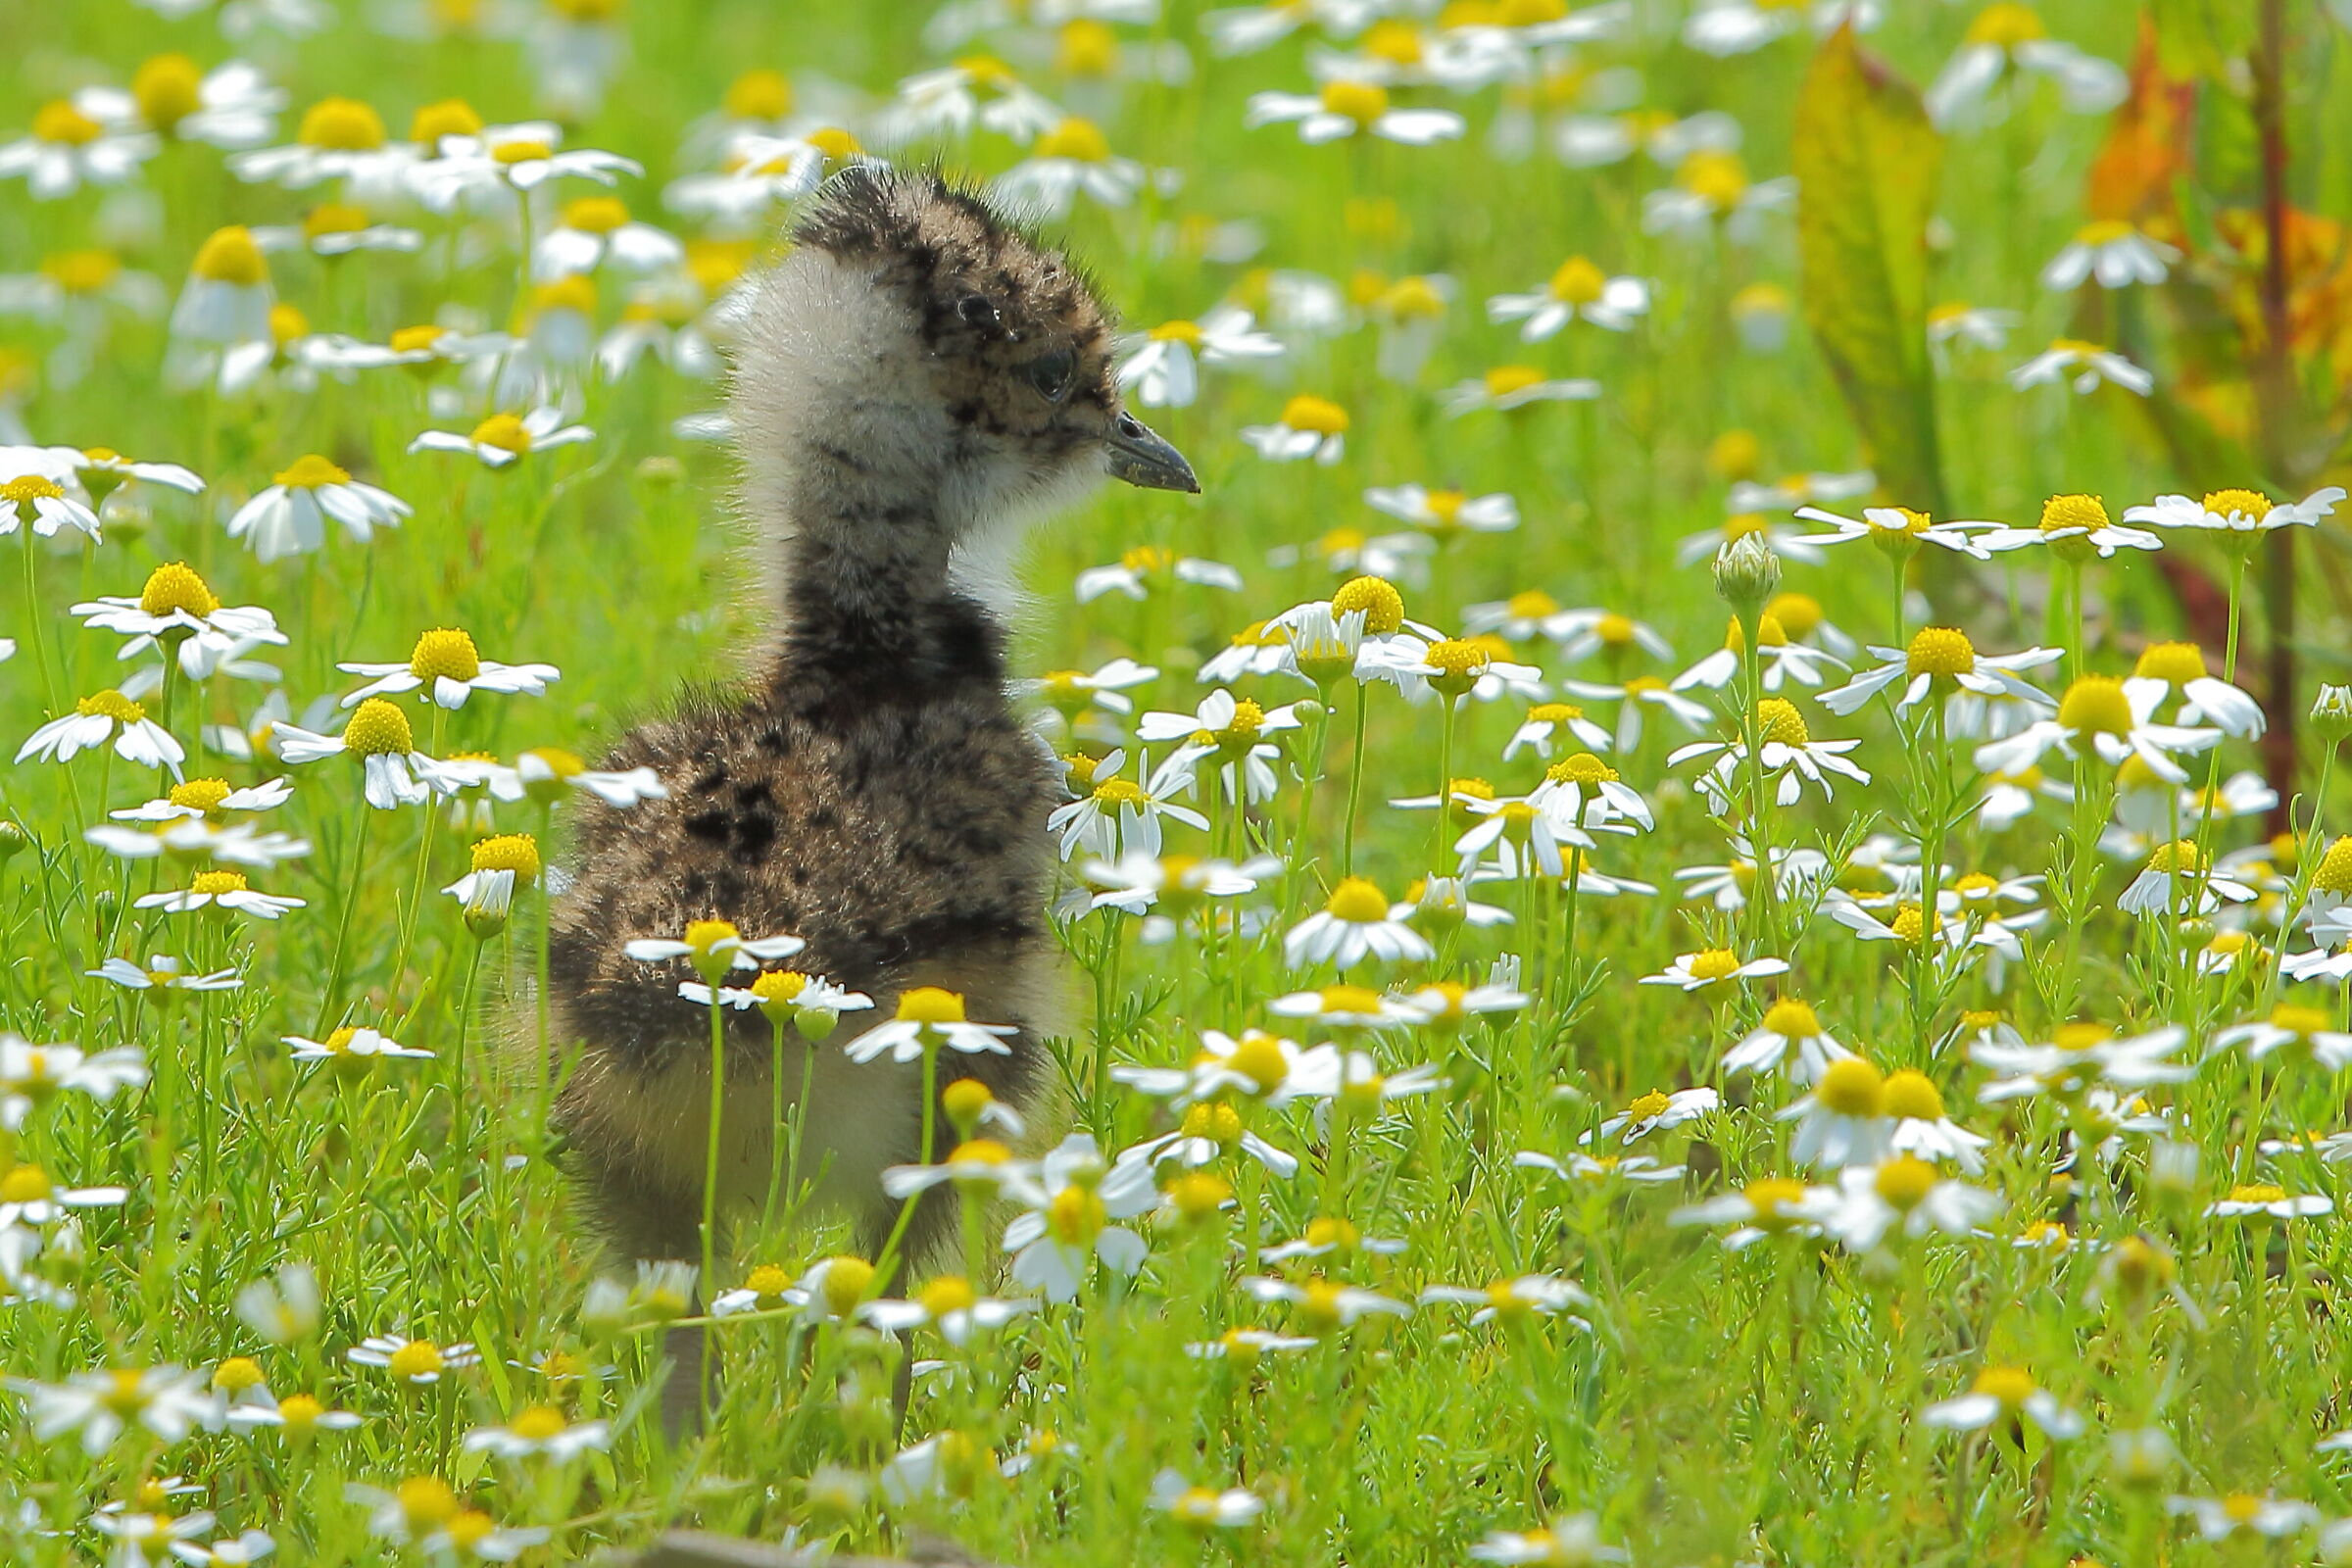 Being born among the flowers...